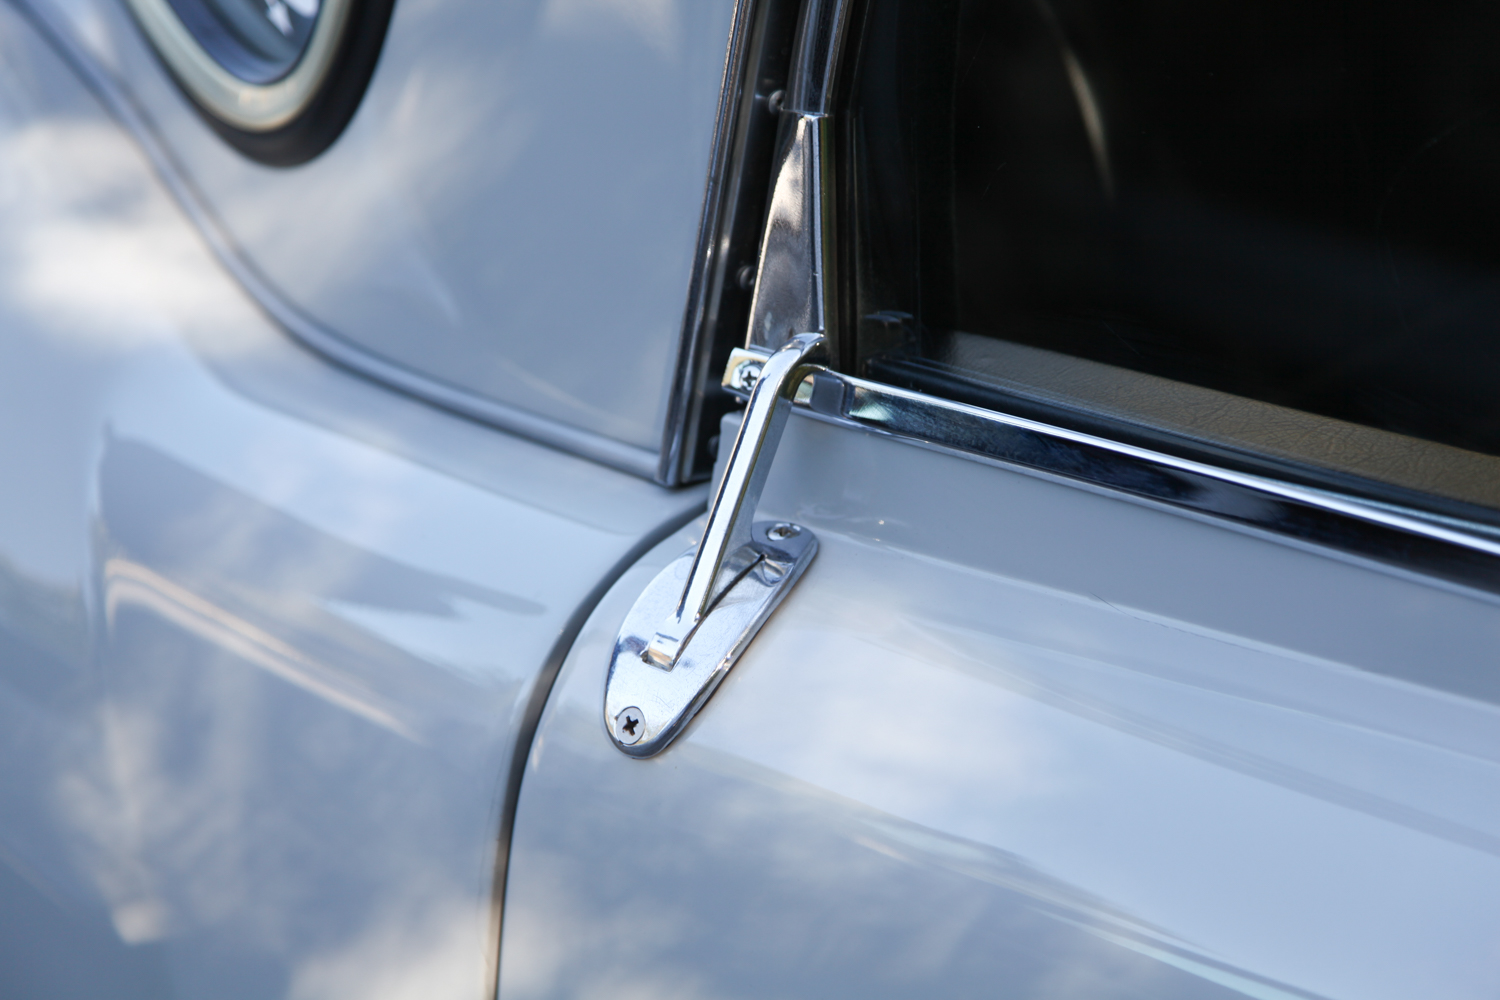 The MGA Coupe's door handle was cool looking and functional. 